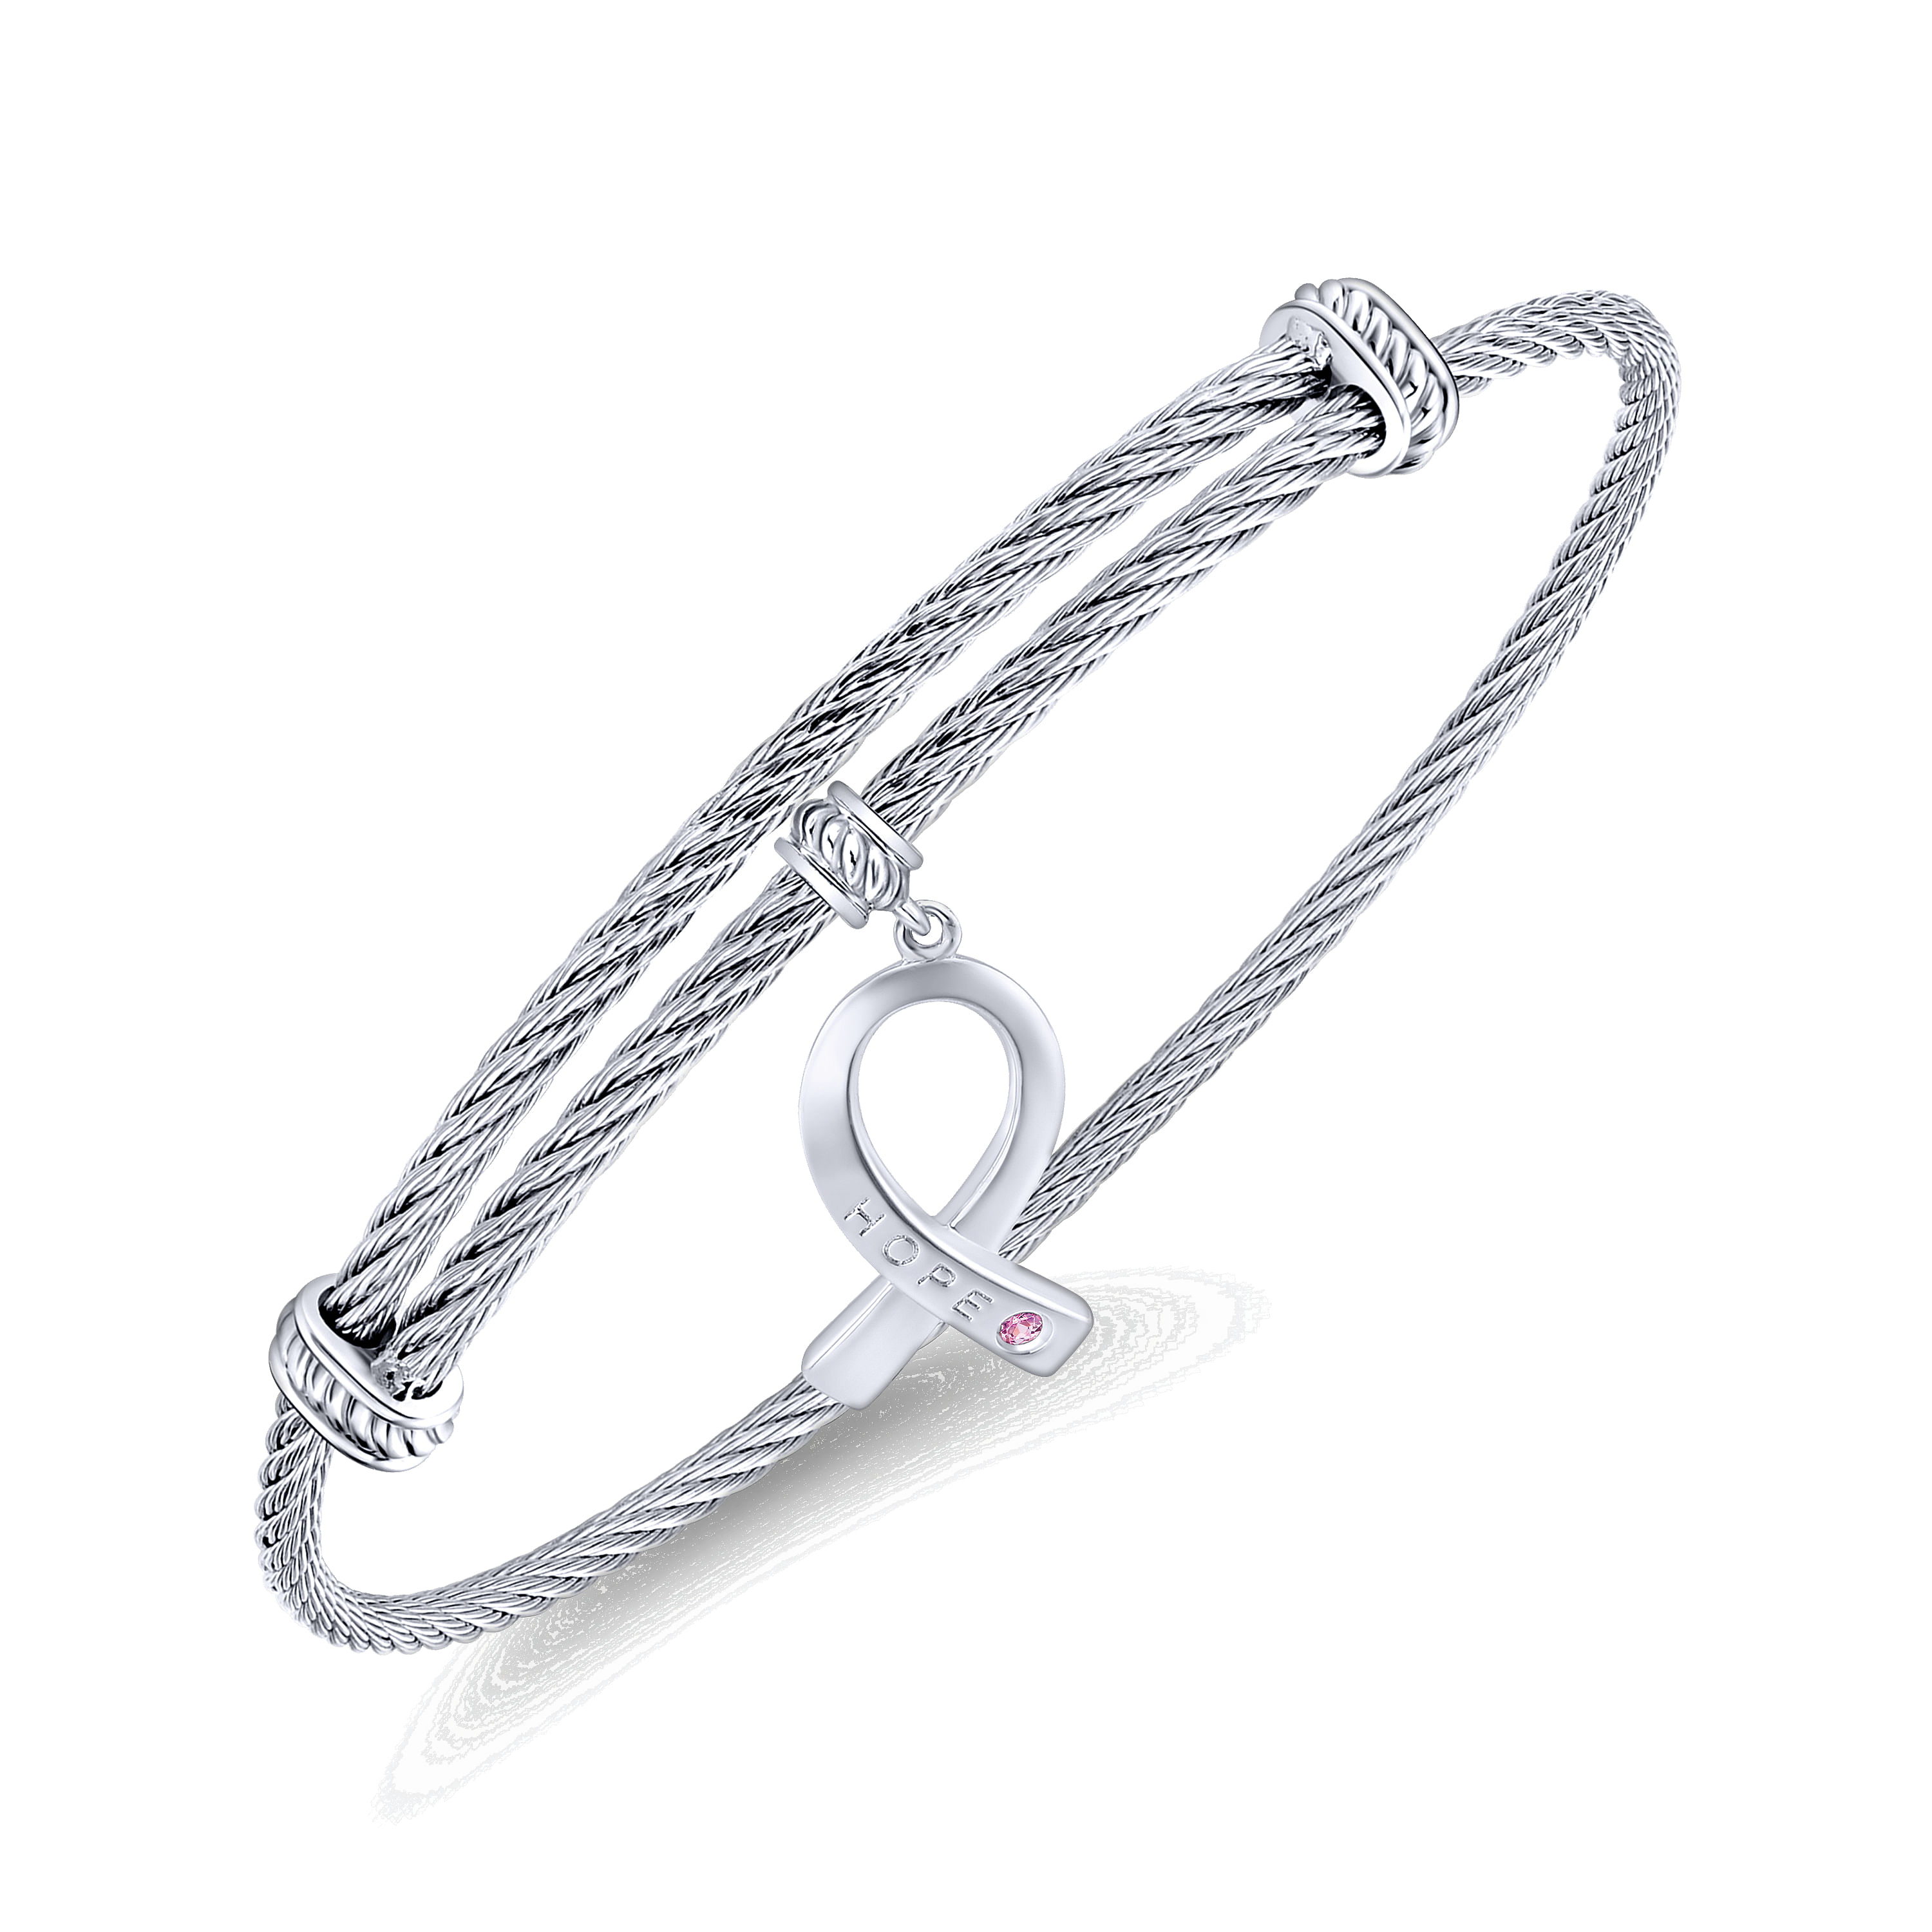 Adjustable Twisted Cable Stainless Steel Bangle with Sterling Silver Pink Zircon Breast Cancer Charm - Shot 2